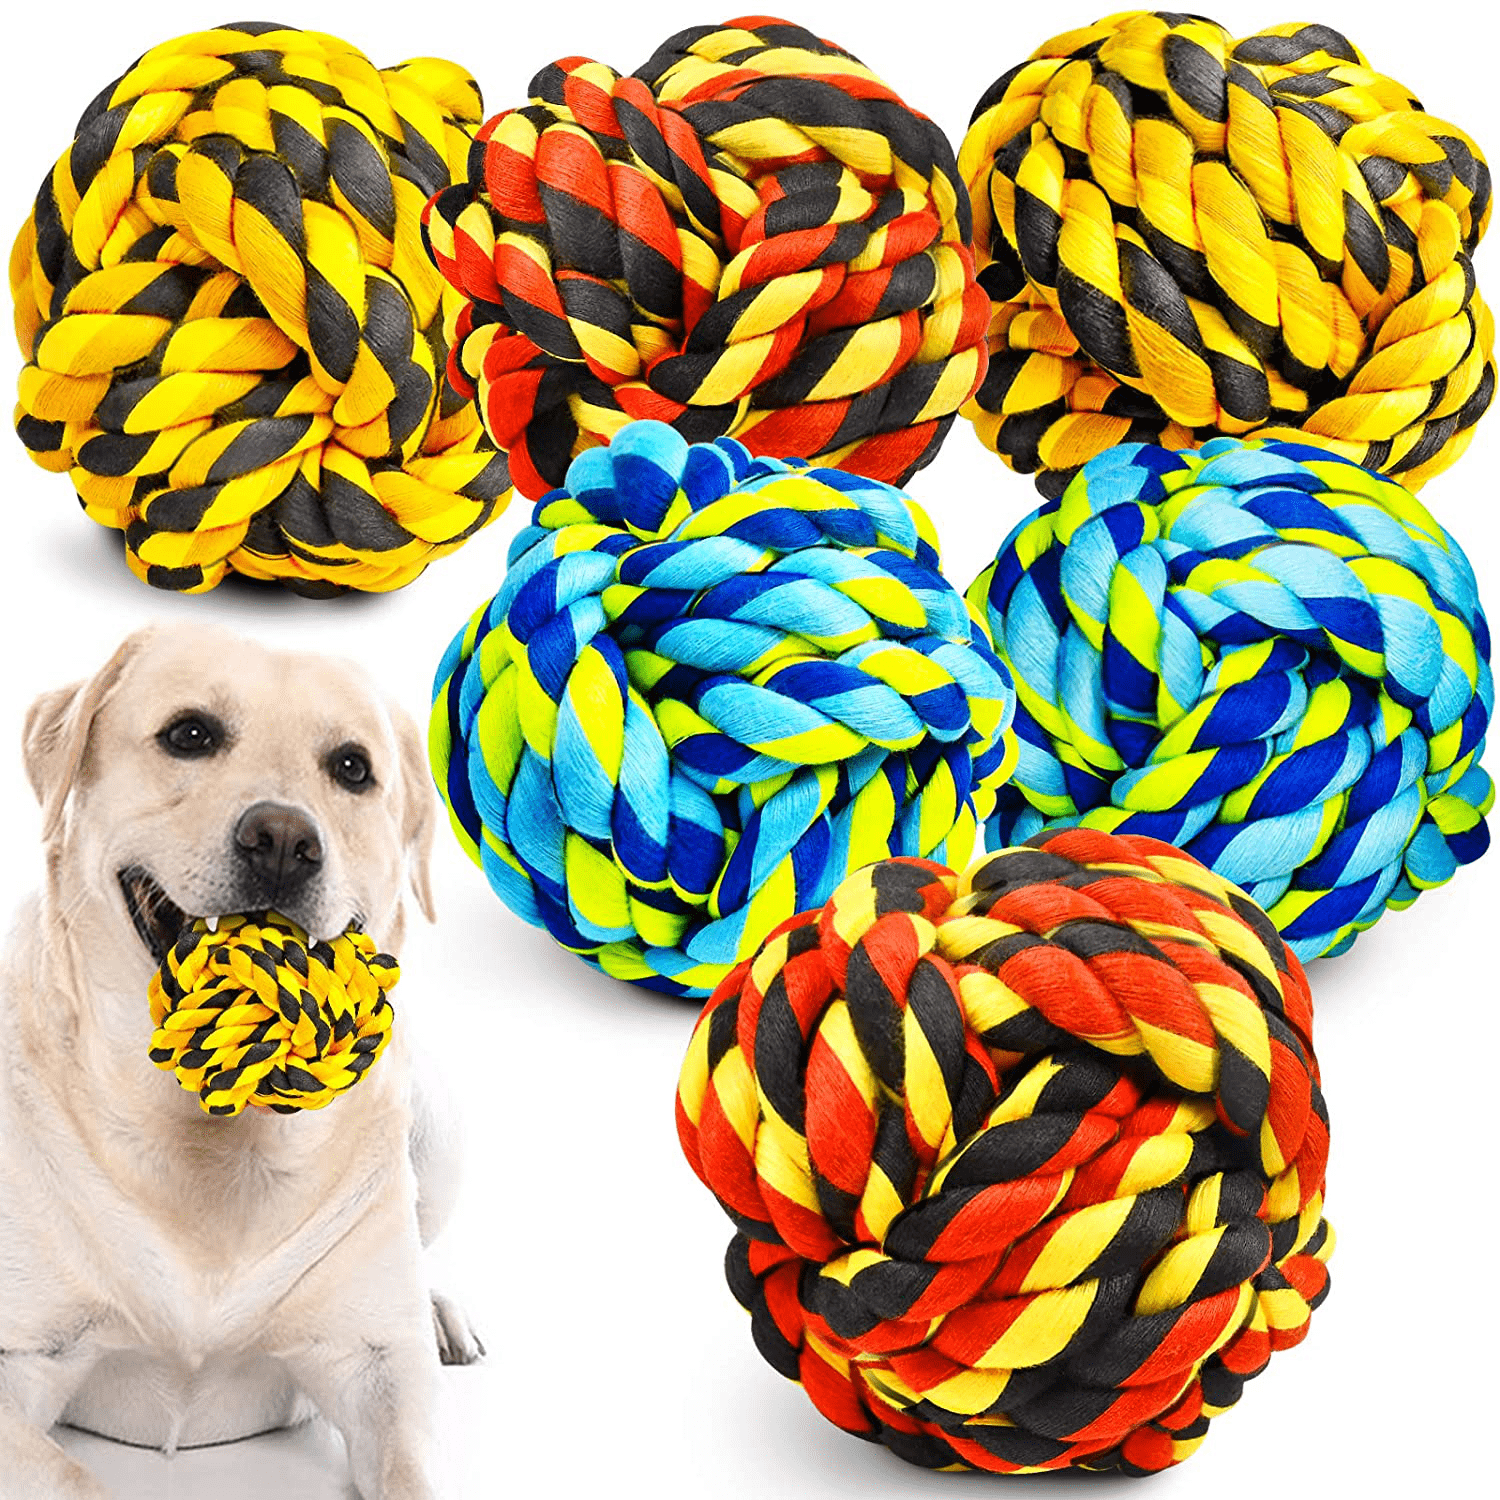 Dog Ball Toys 3-Rubber Tough Dog Toys-Colorful Puppy Ball Toy